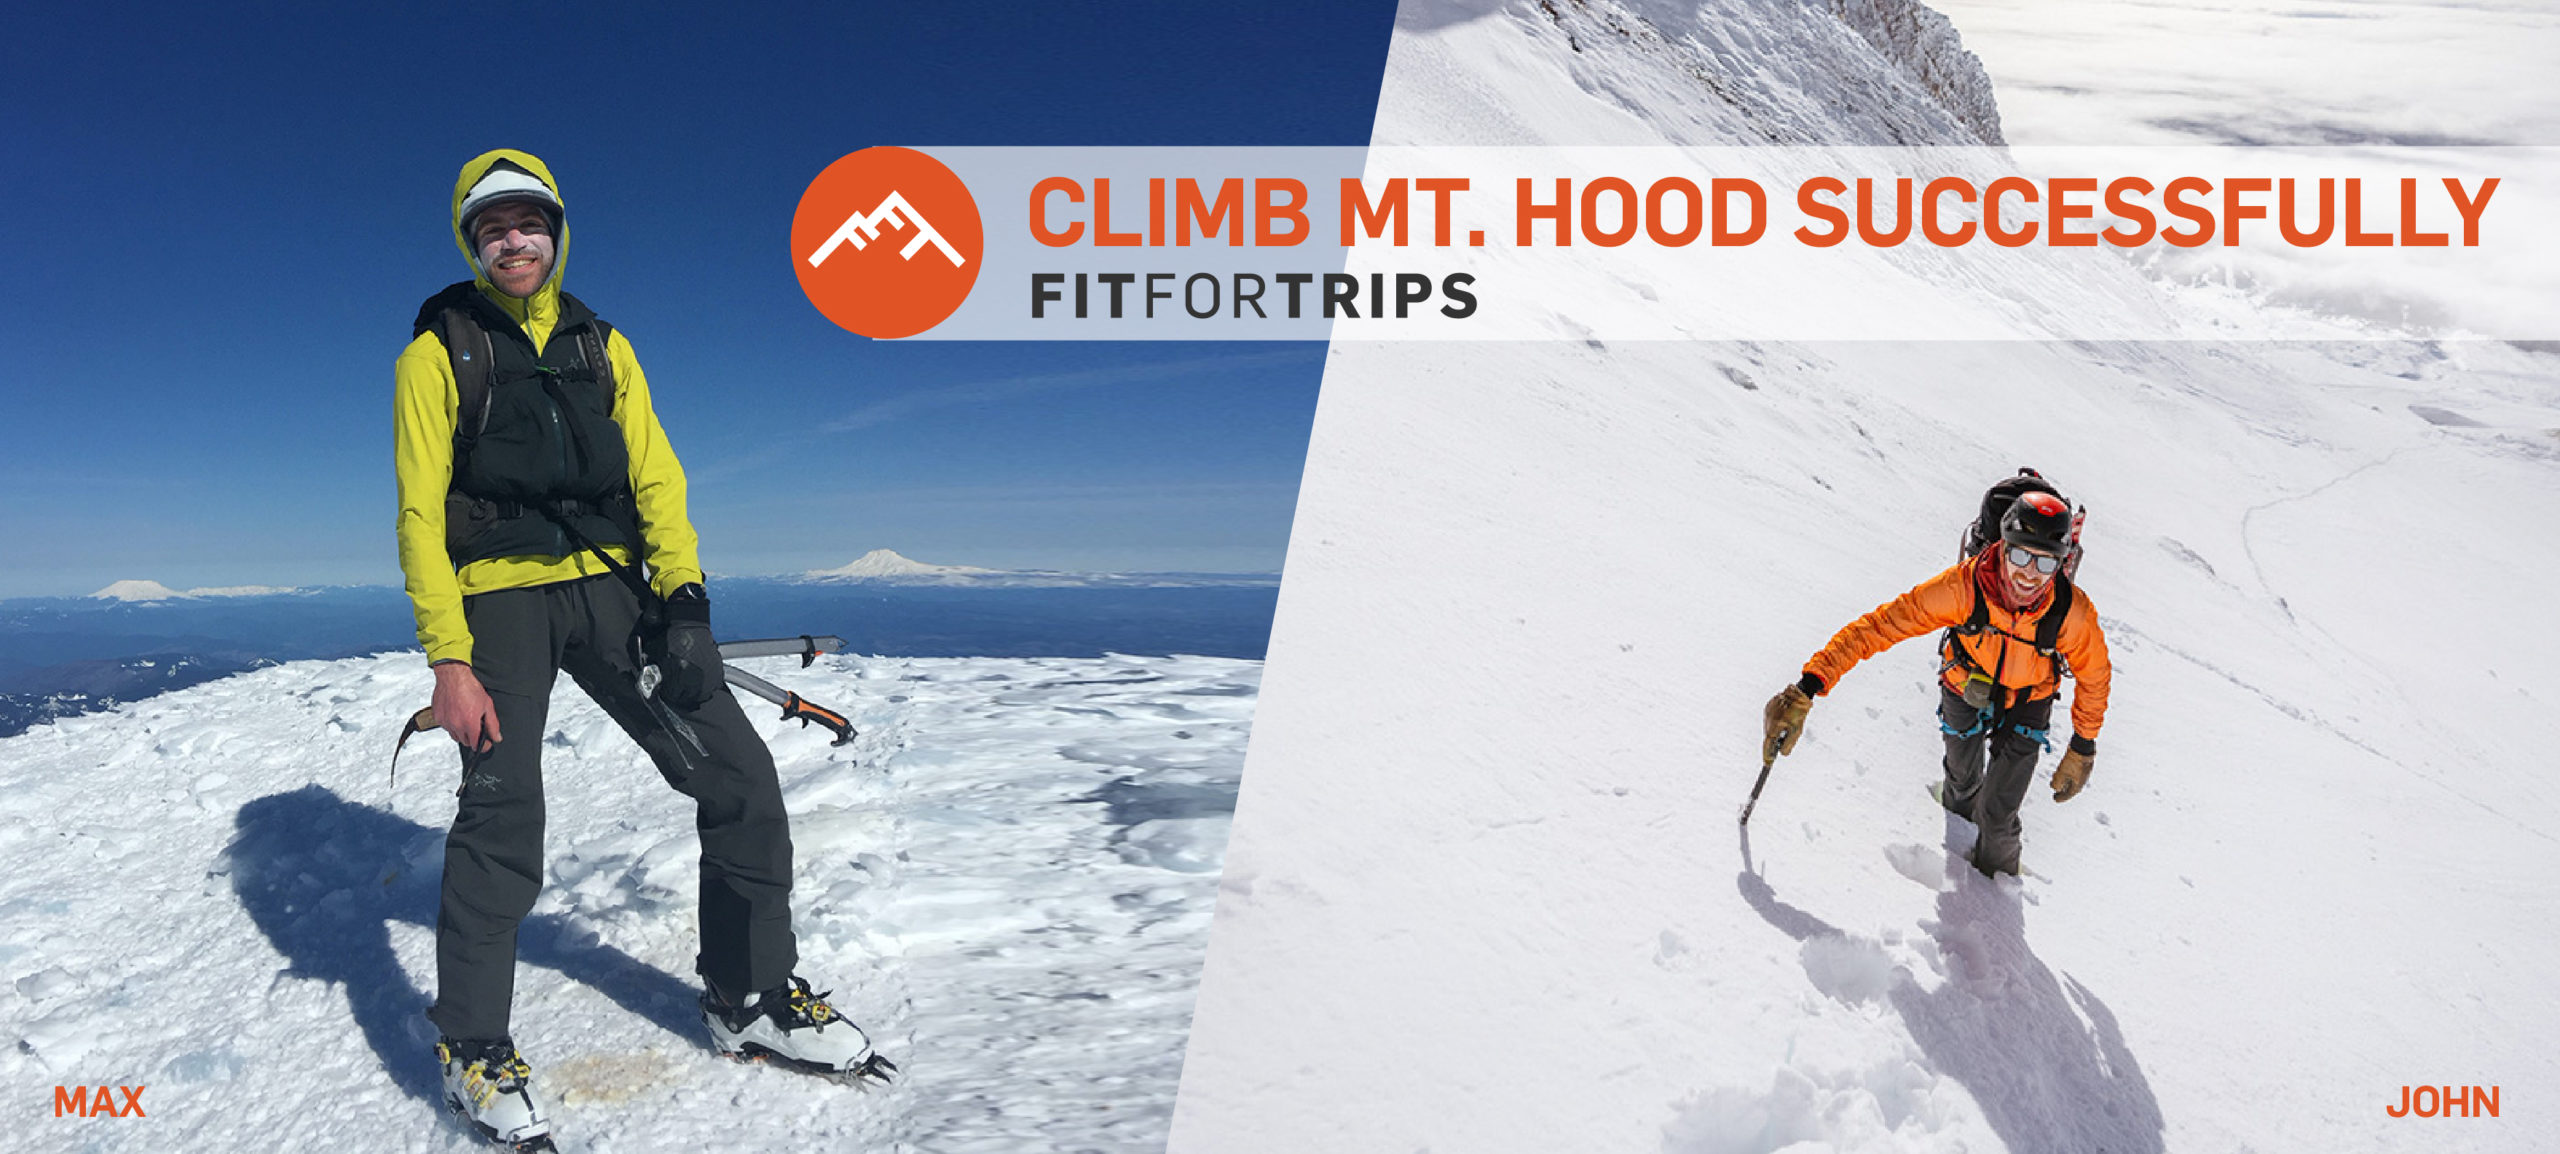 Your guide to successfully climb Mt. Hood.